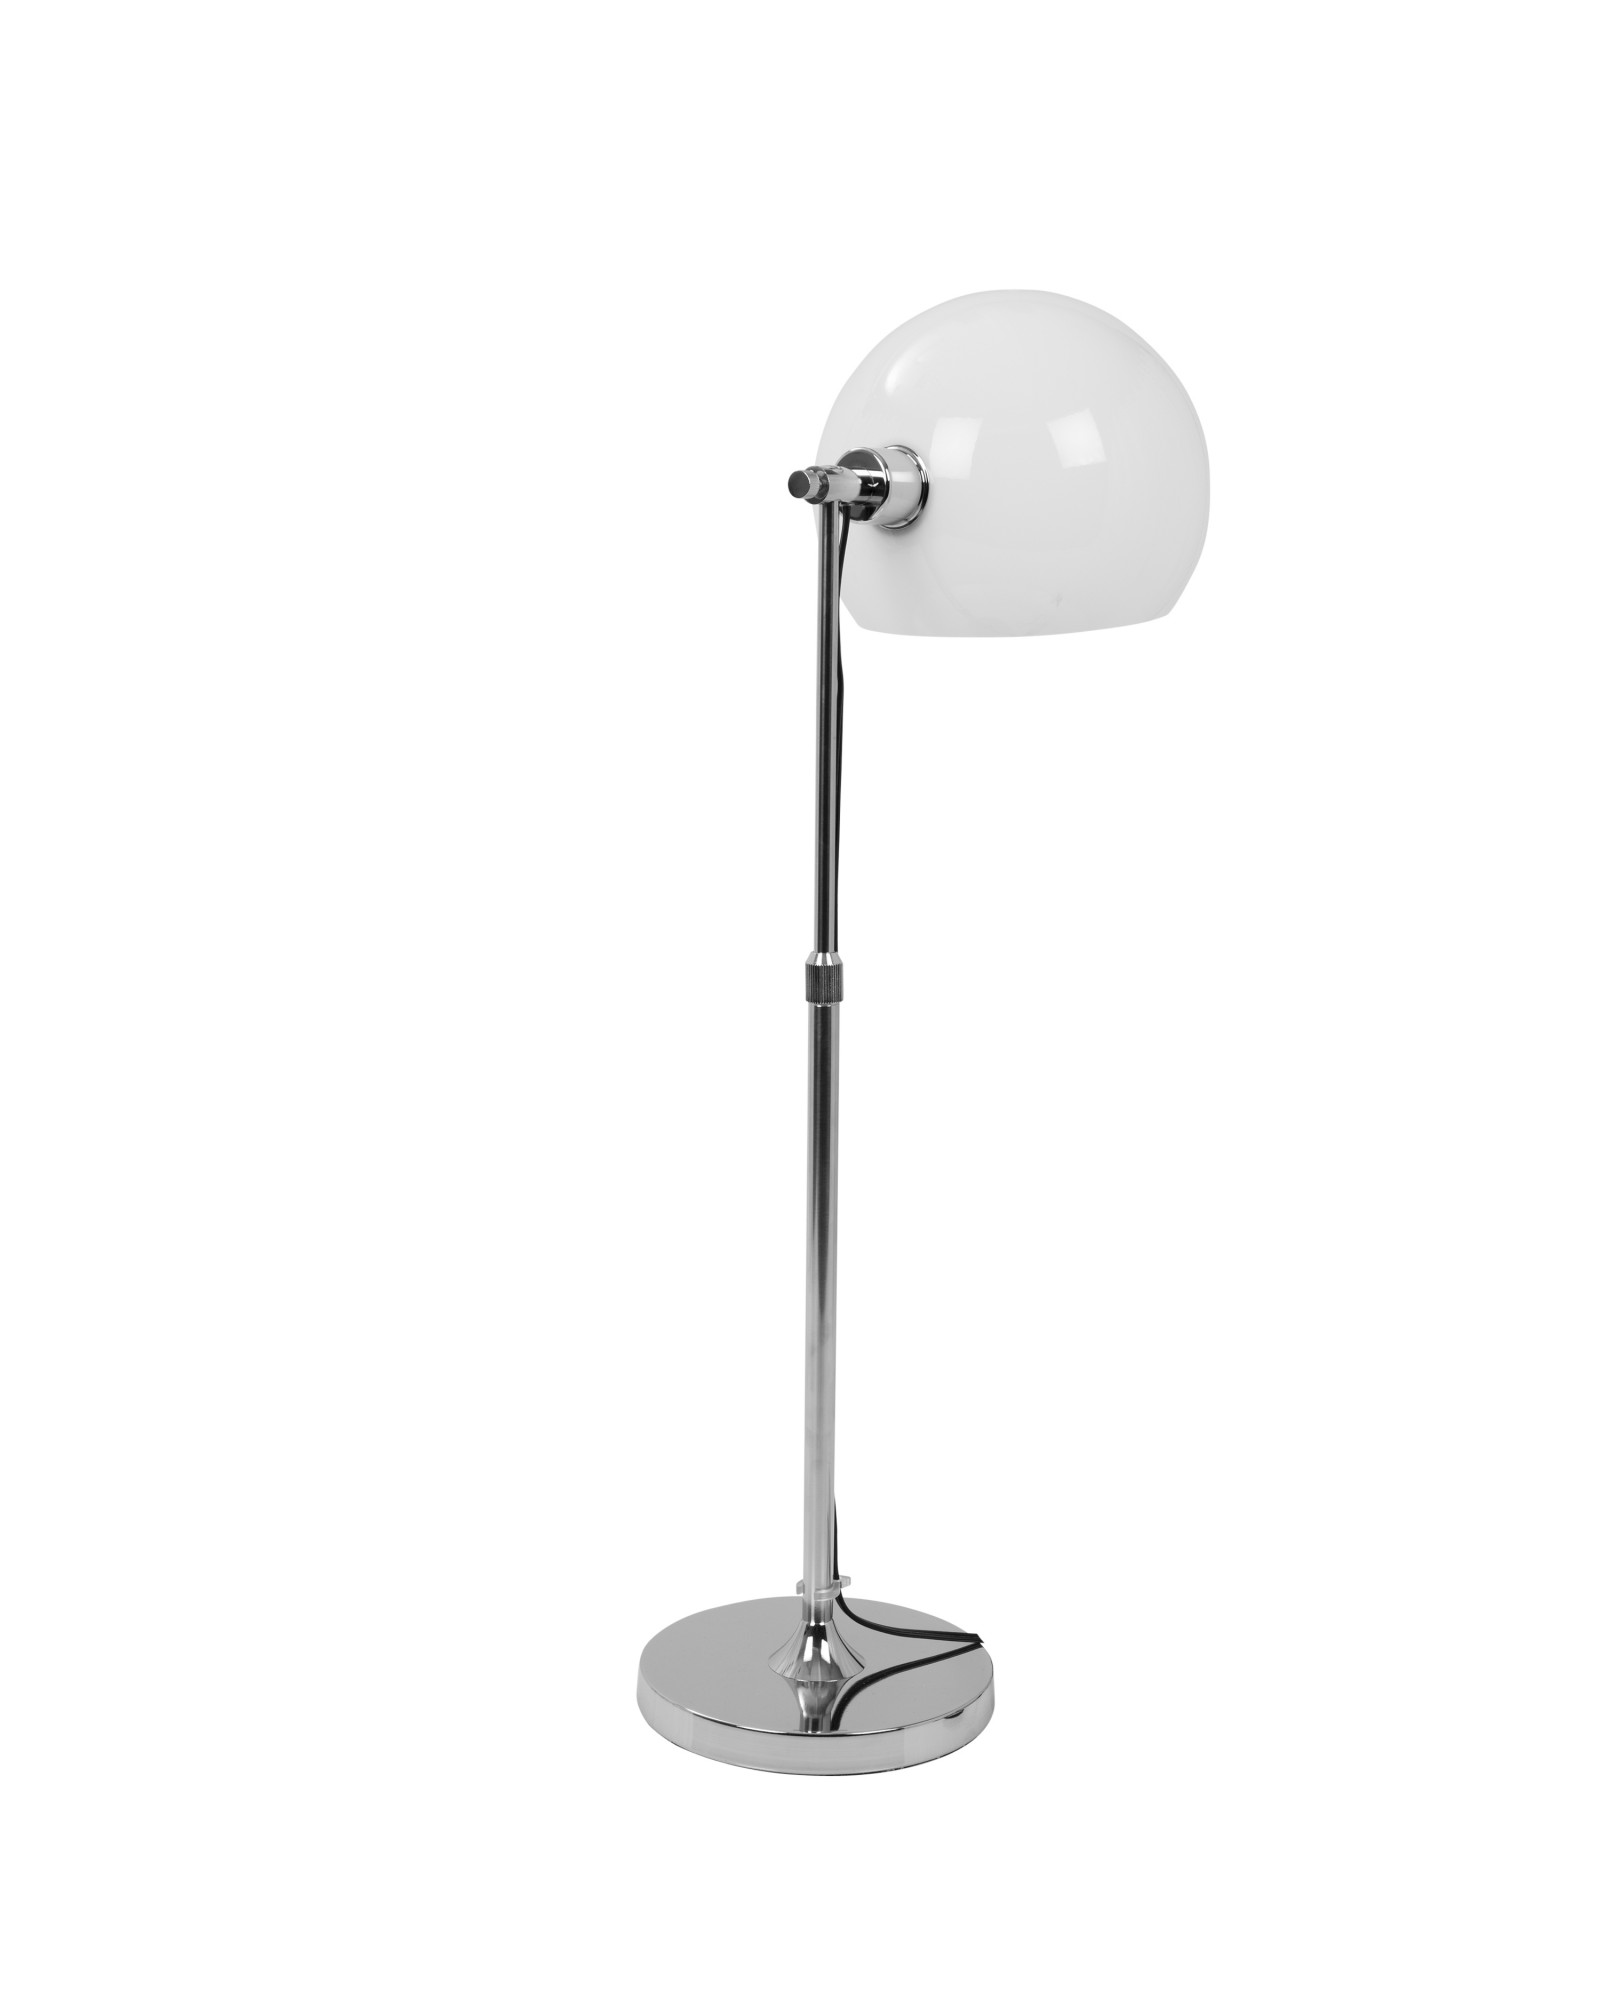 Decco Contemporary Adjustable Table Lamp in Chrome with White Shade